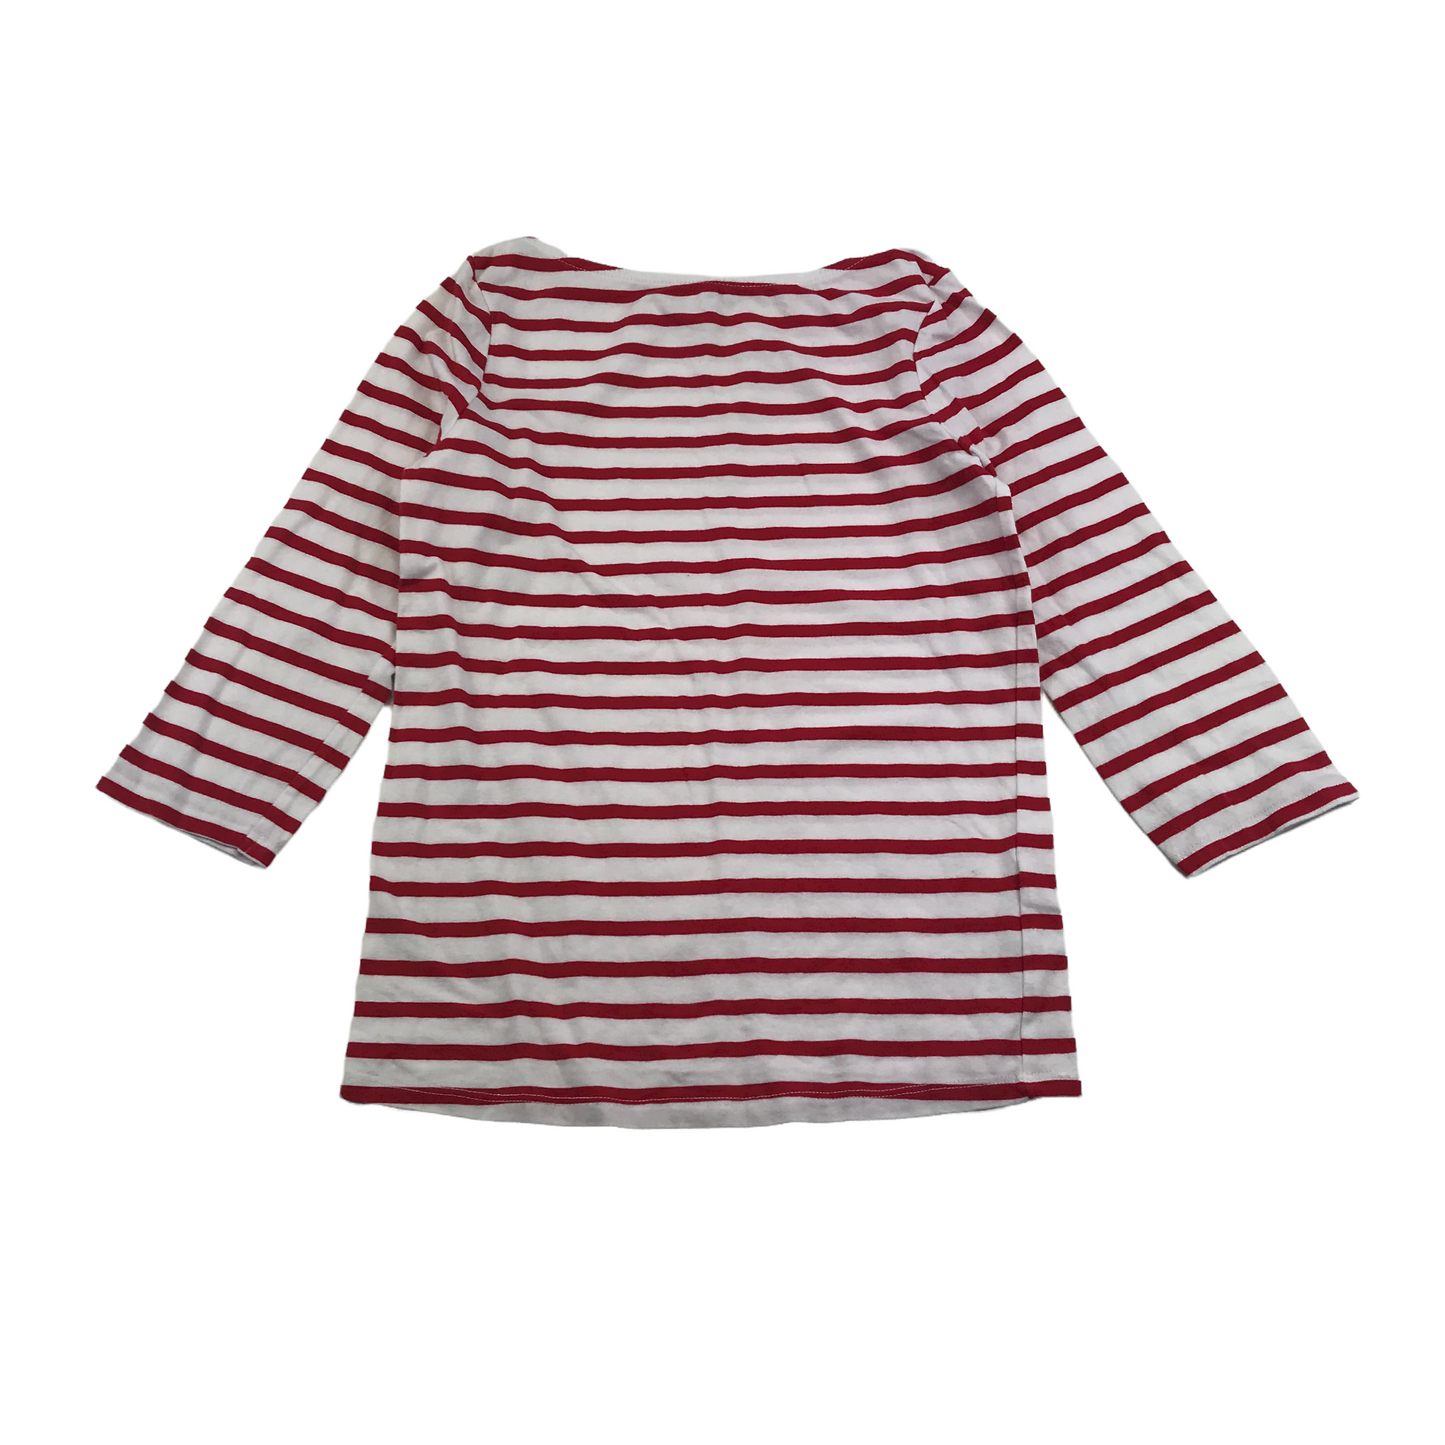 New Look Red and White Stripy Organic Cotton T-shirt Women's Size 6